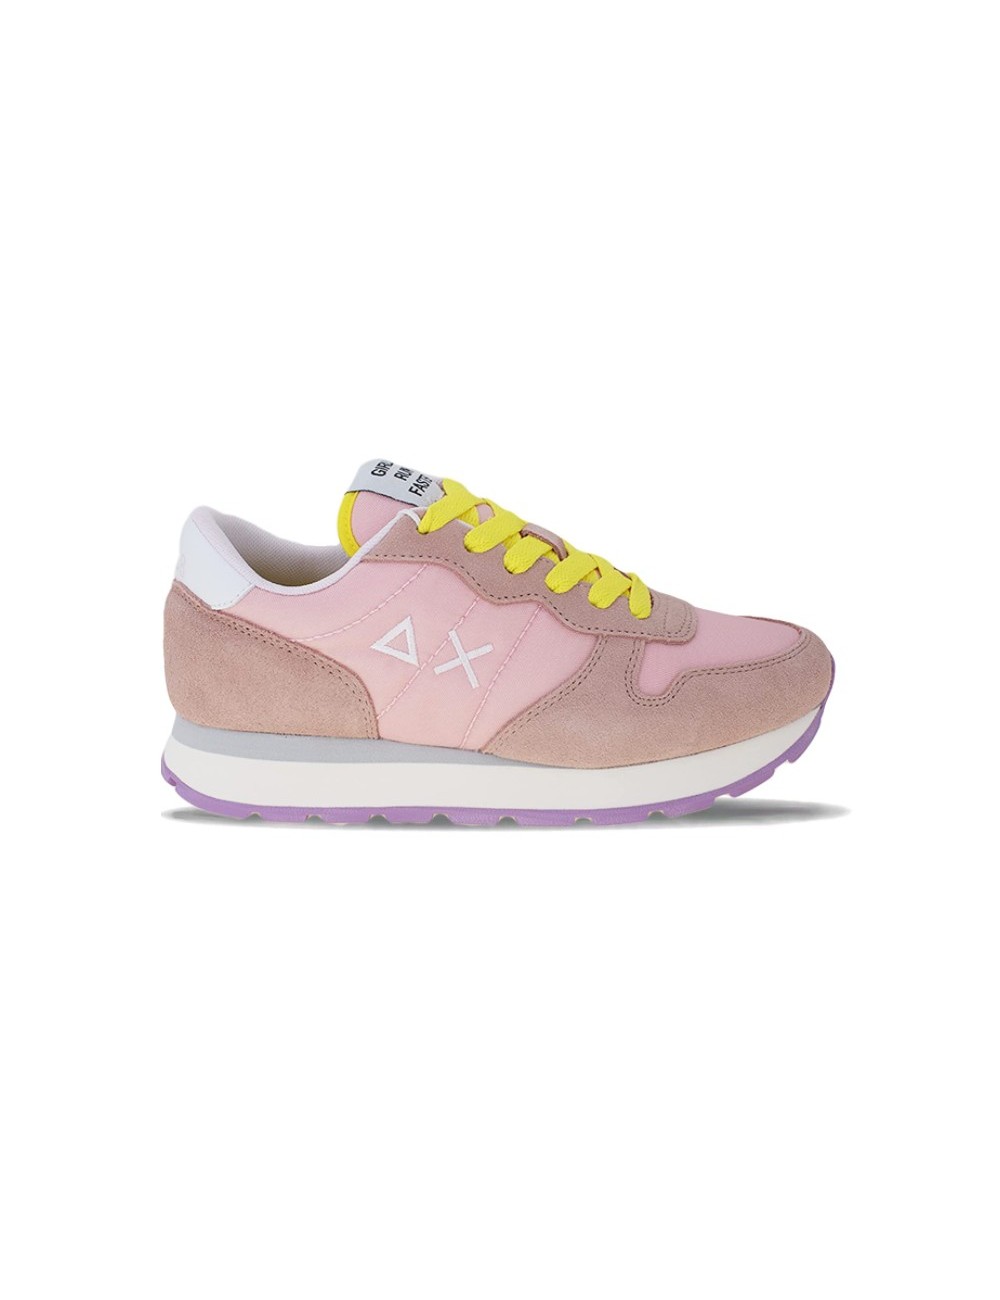 WOMEN'S SNEAKERS SUN 68 ALLY SOLID NYLON PINK